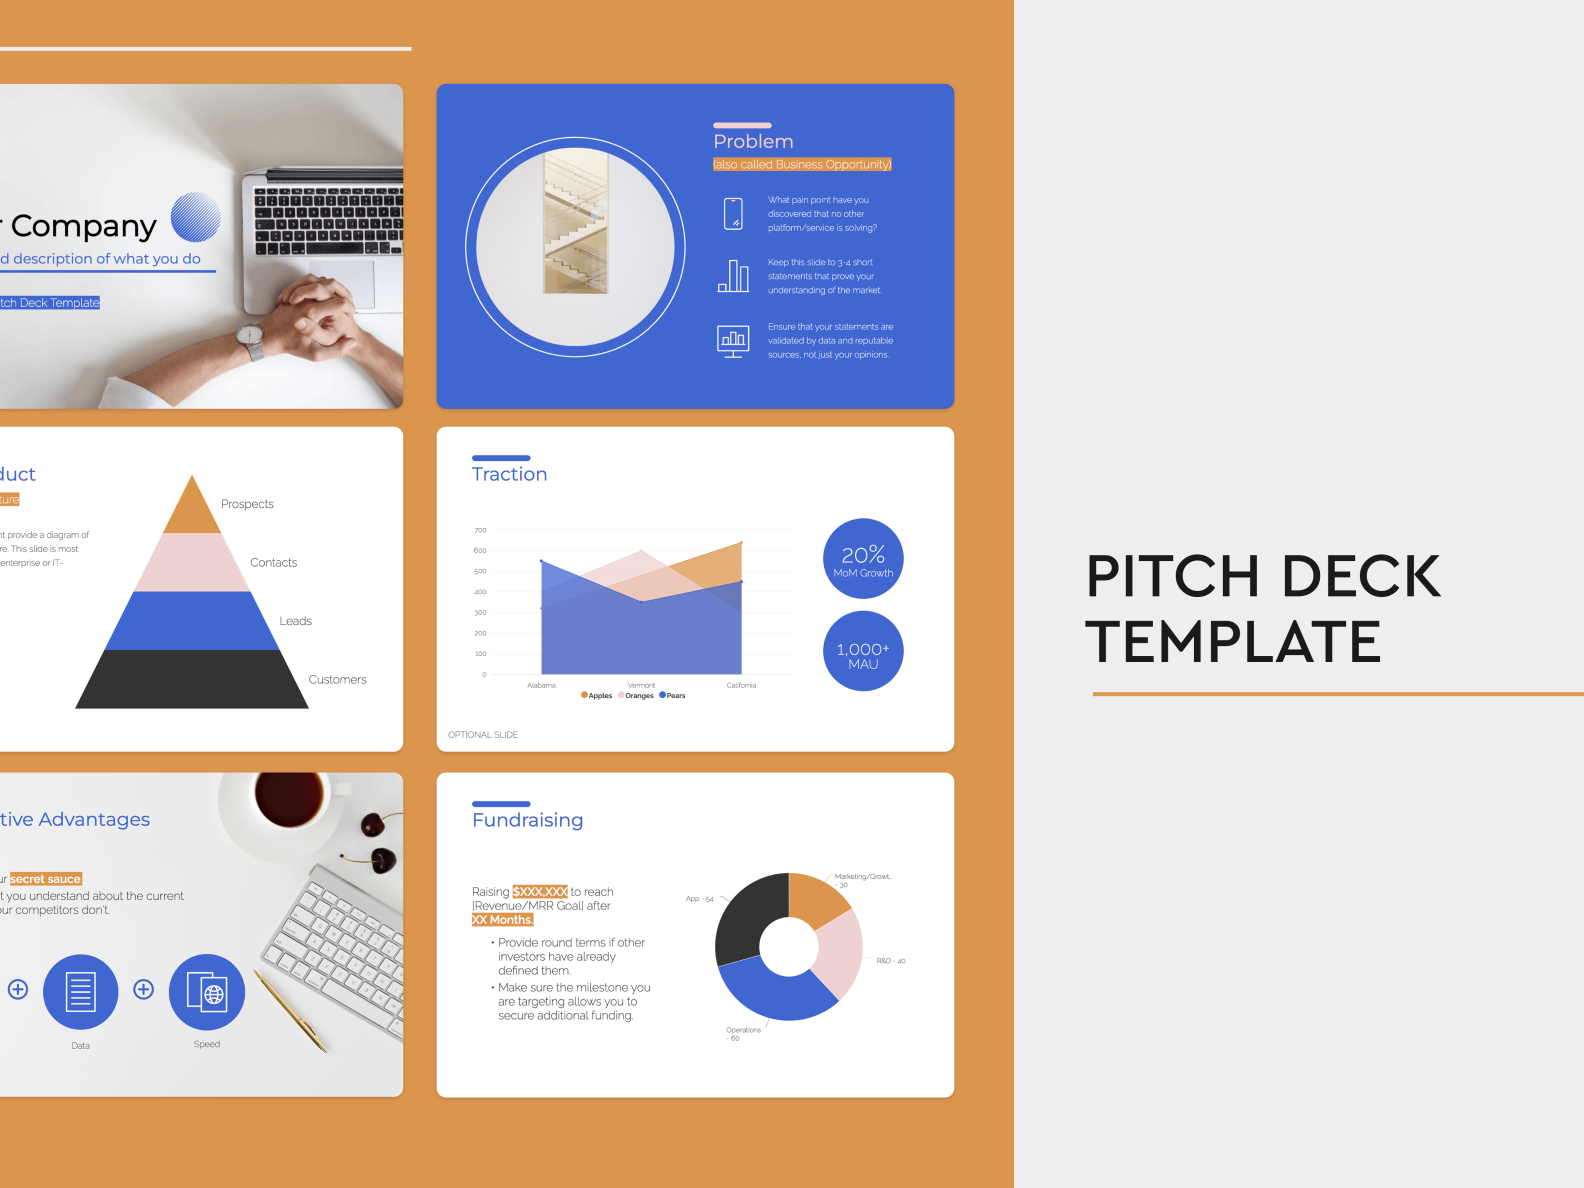 Pitch Deck Template 2022 by Slidebean by Slidebean Pitch Deck Design